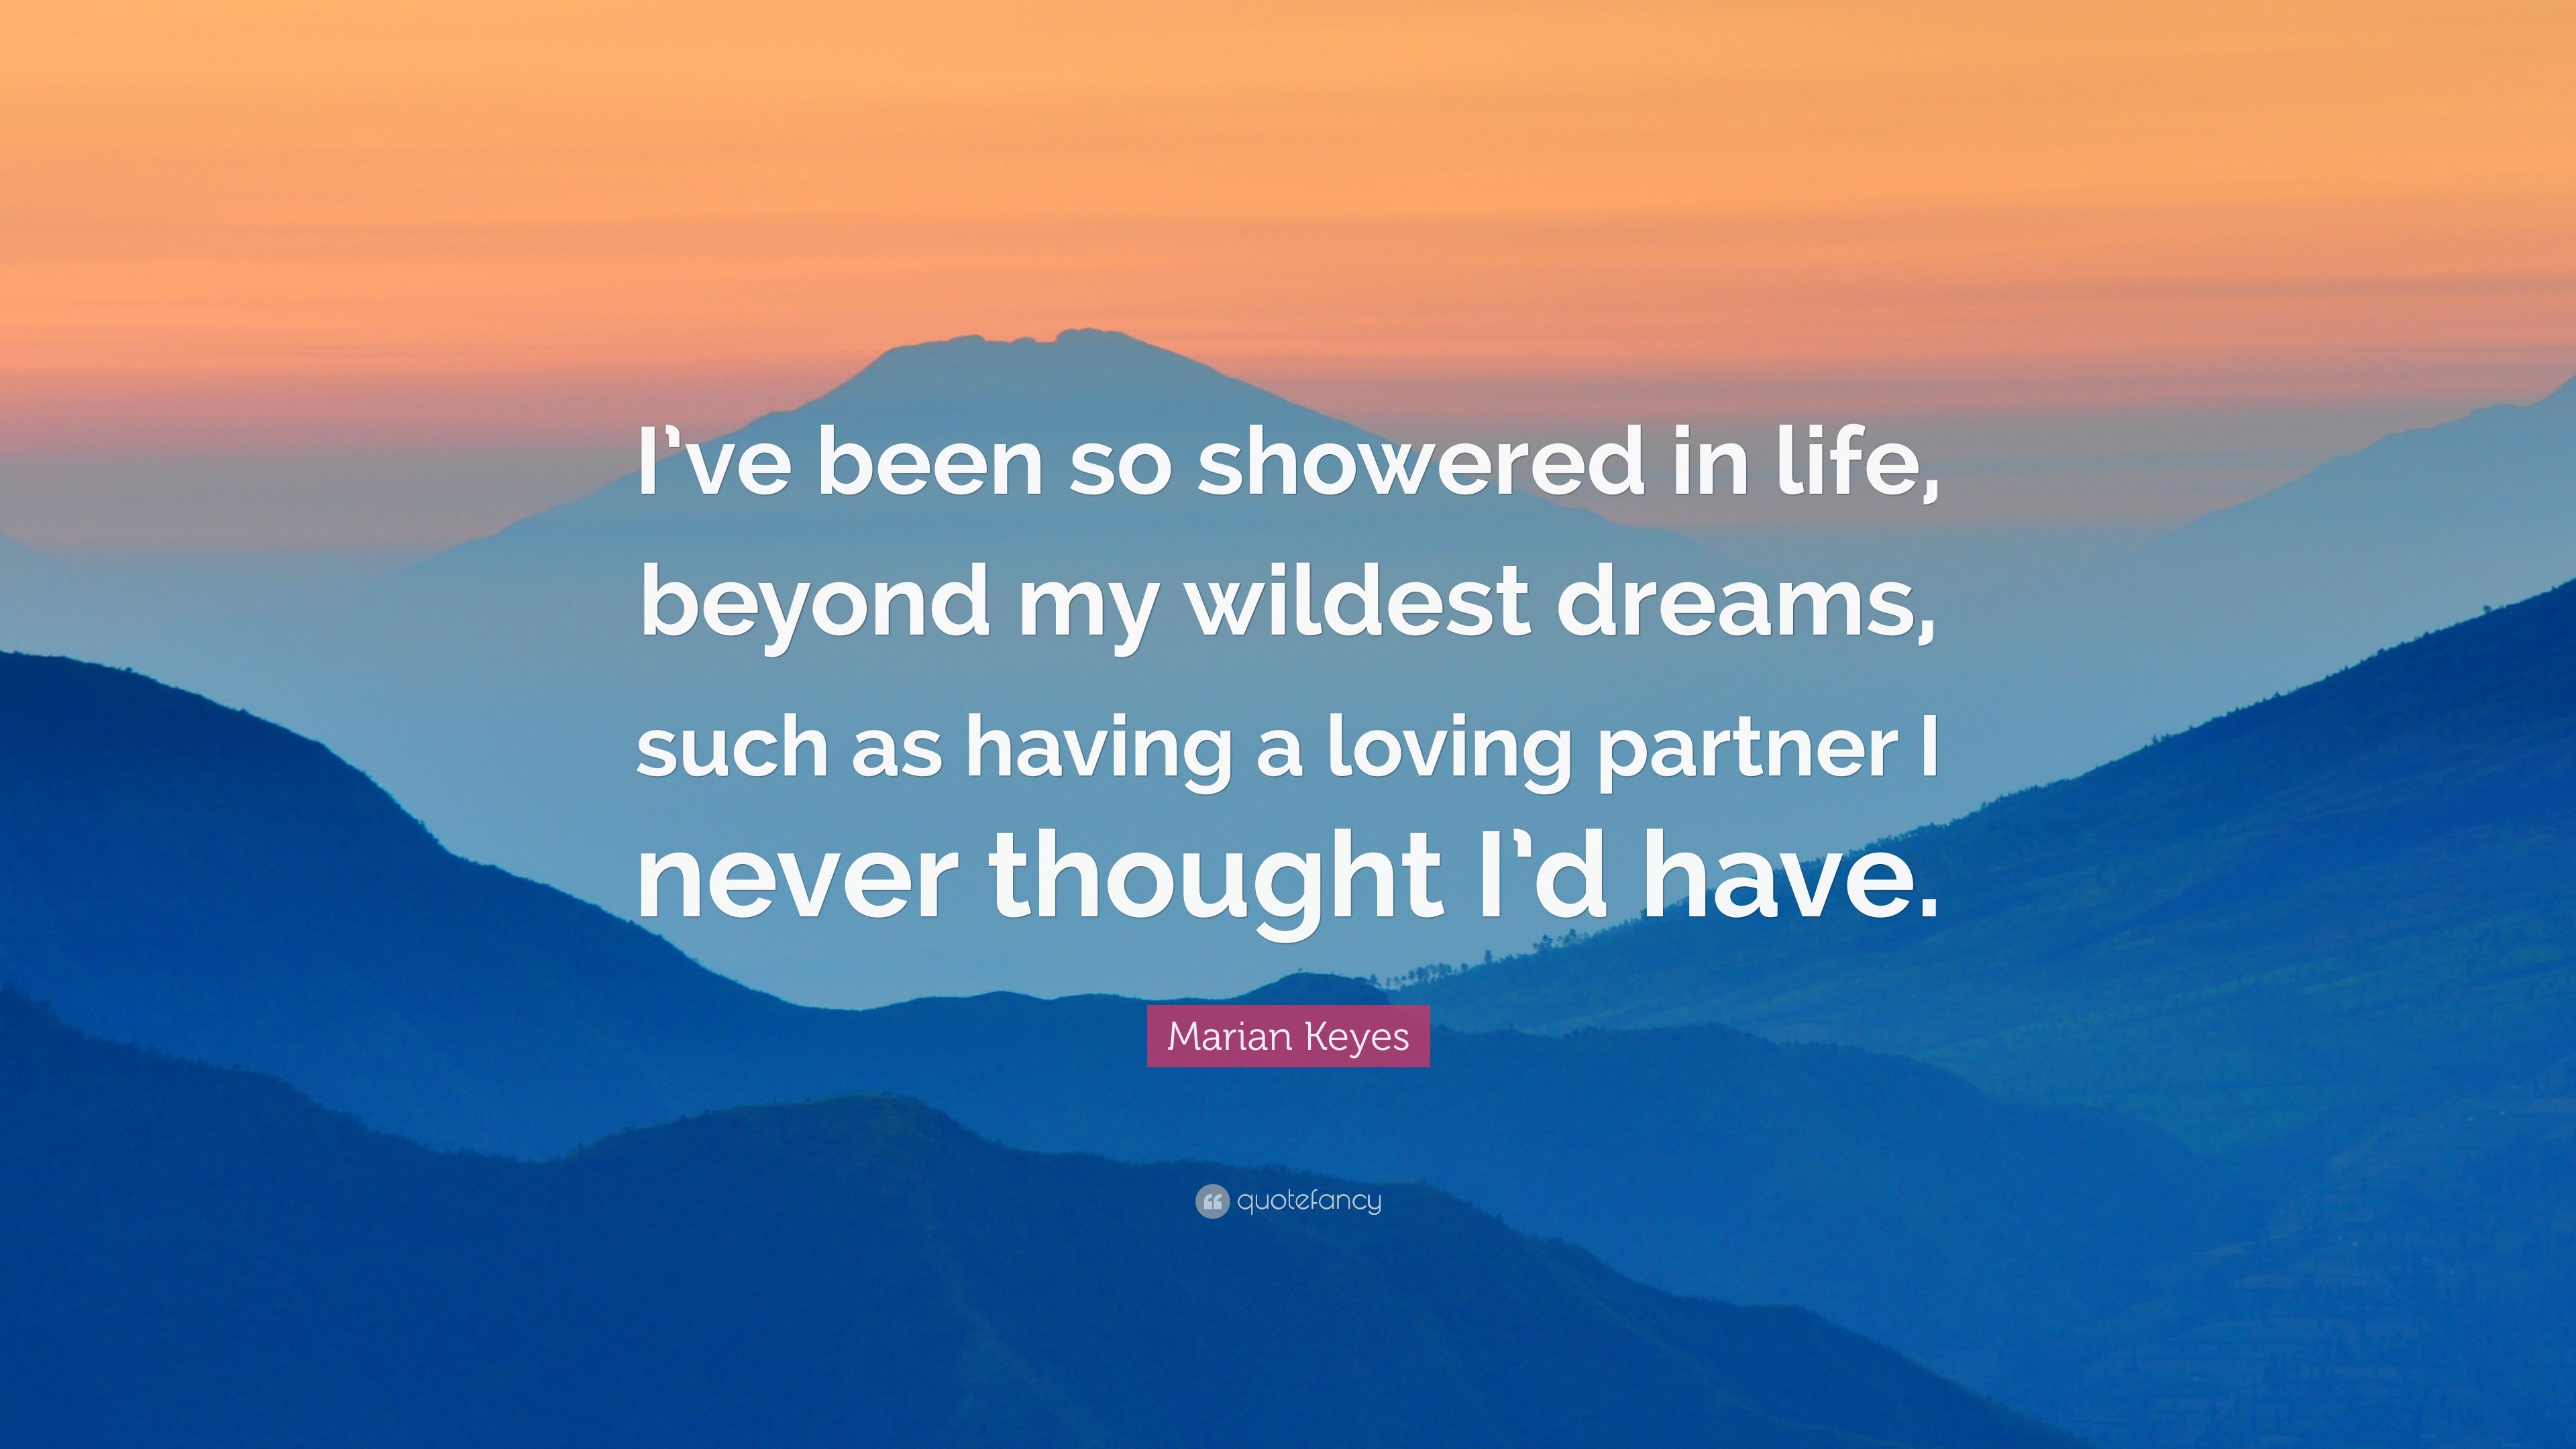 Marian Keyes Quote: “I've been so showered in life, beyond my wildest dreams, such as having a loving partner I never thought I'd have.” (7 wallpaper)